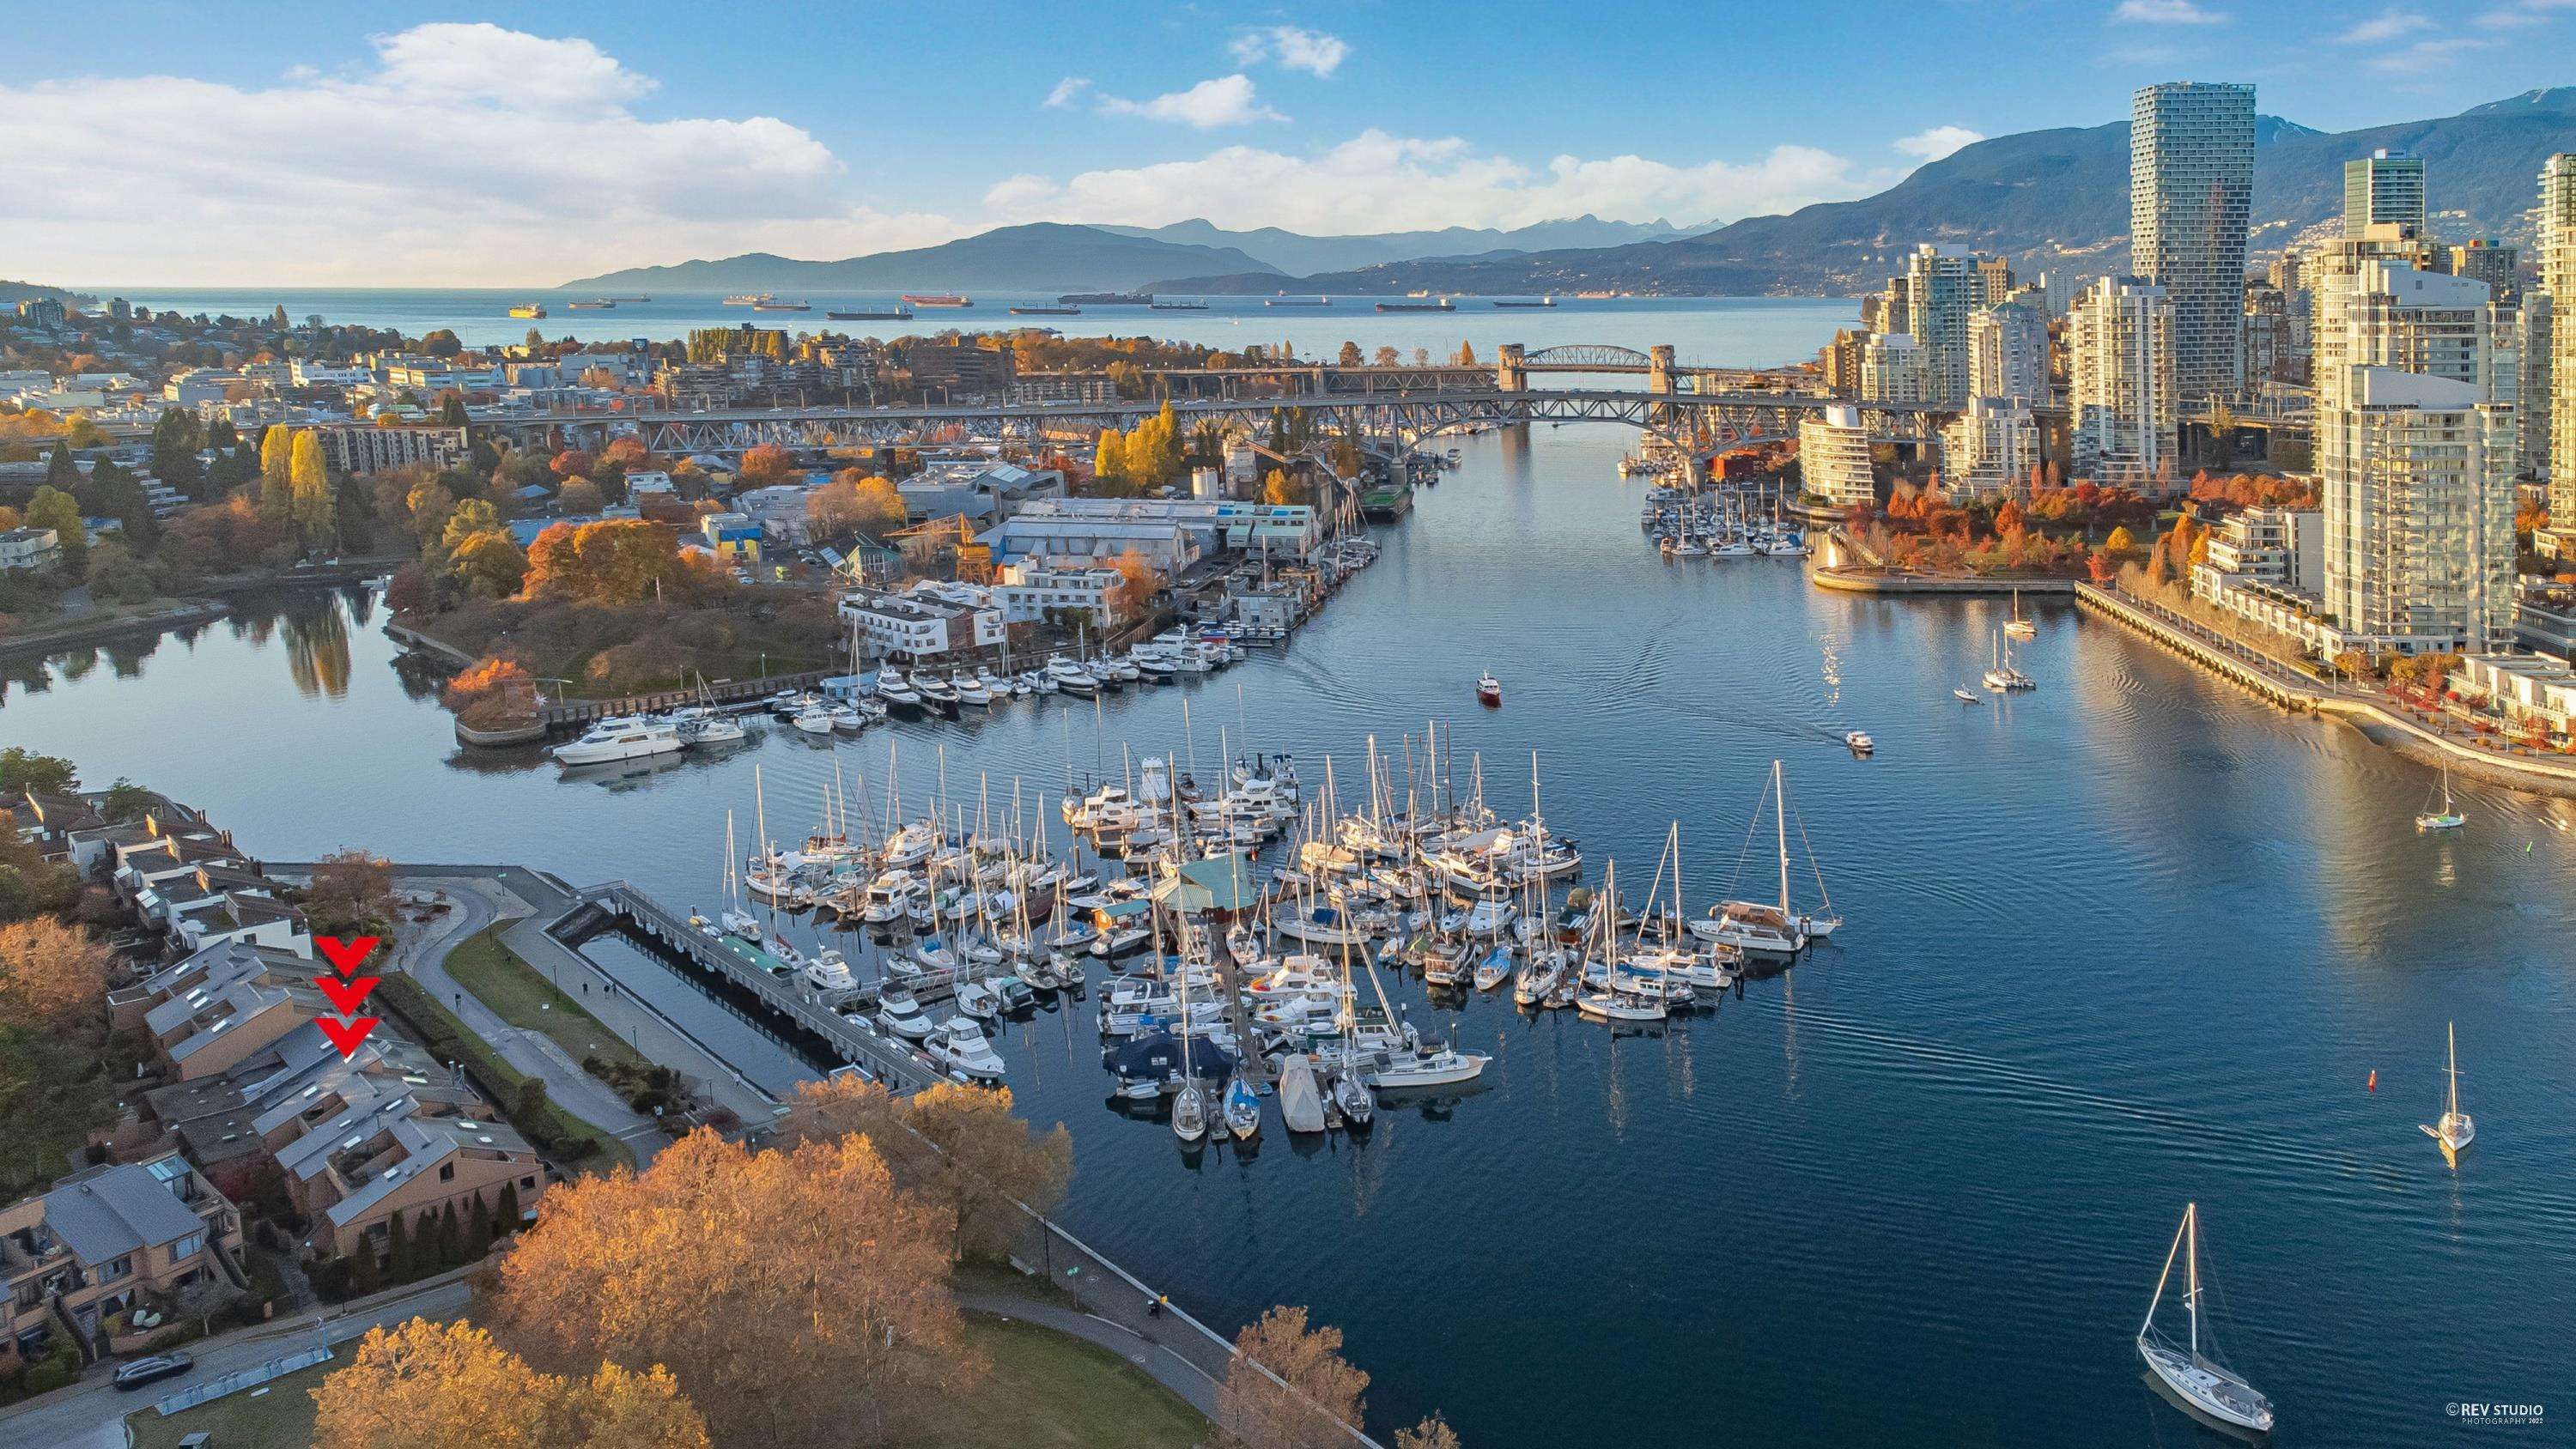 Open House. Open House on Sunday, November 13, 2022 2:00PM - 4:00PM
WATERFRONT TOWNHOUSE w/stunning water, marina, cityscape and mtn views. 180 degree views W out to English Bay sunsets and E to the Cambie St. Bridge sunrises. Renovated by Colbrone Archit